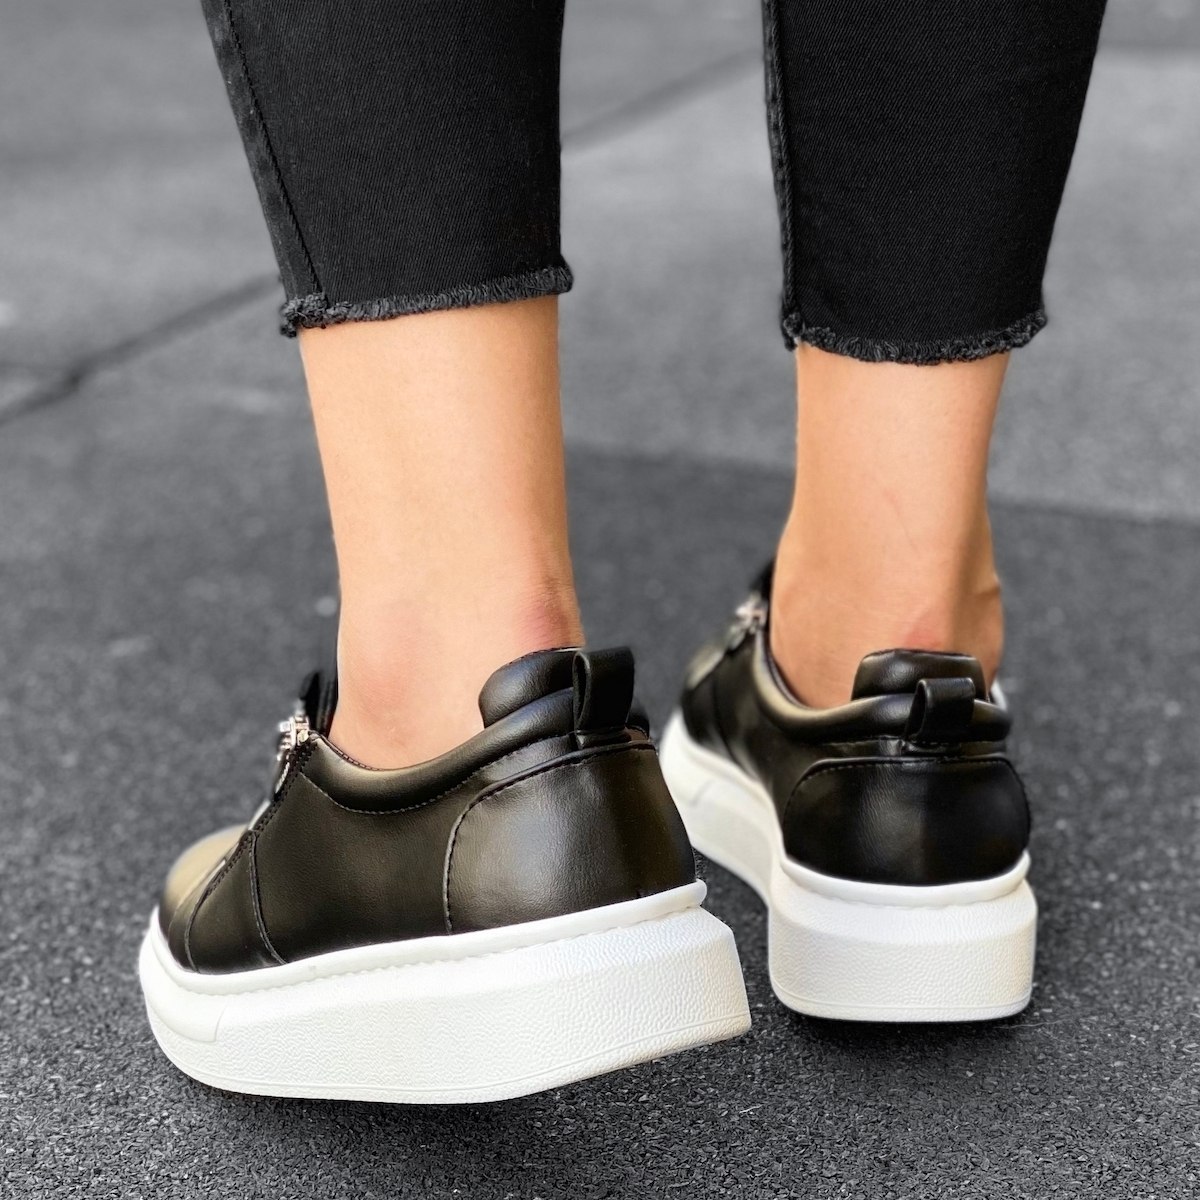 Woman's Hype Sole Zipped Style Sneakers in Black-White - 4